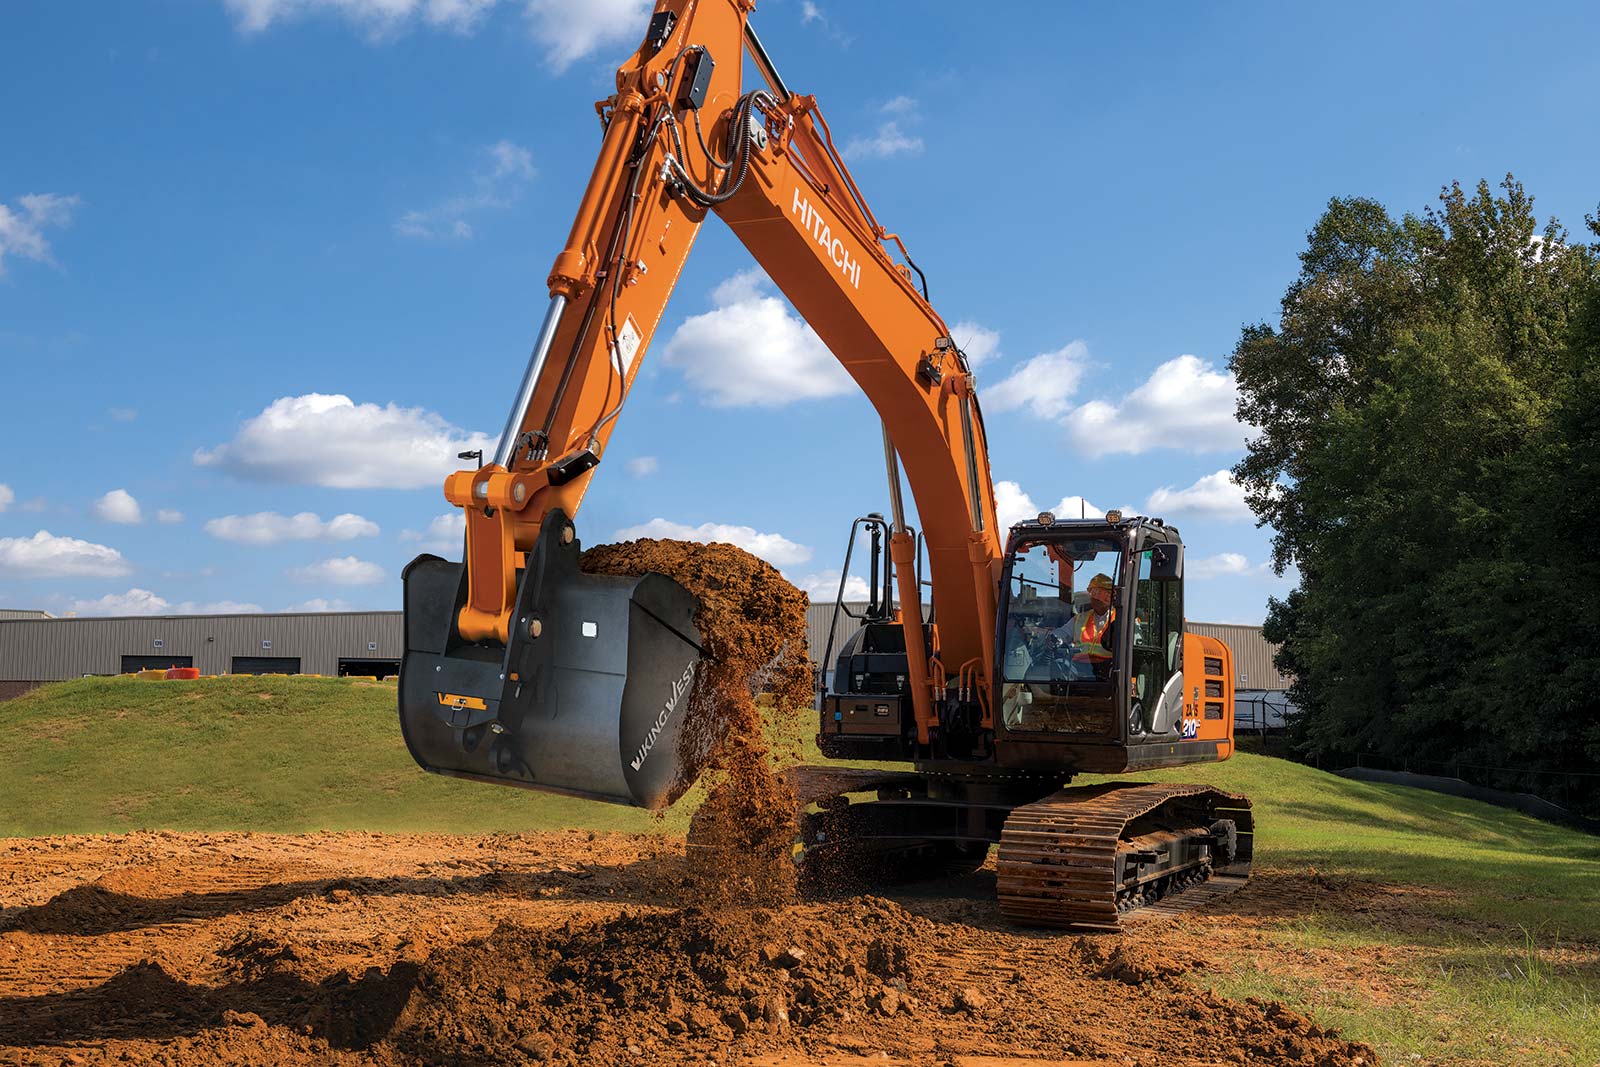 How to Choose an Excavator Quick Coupler